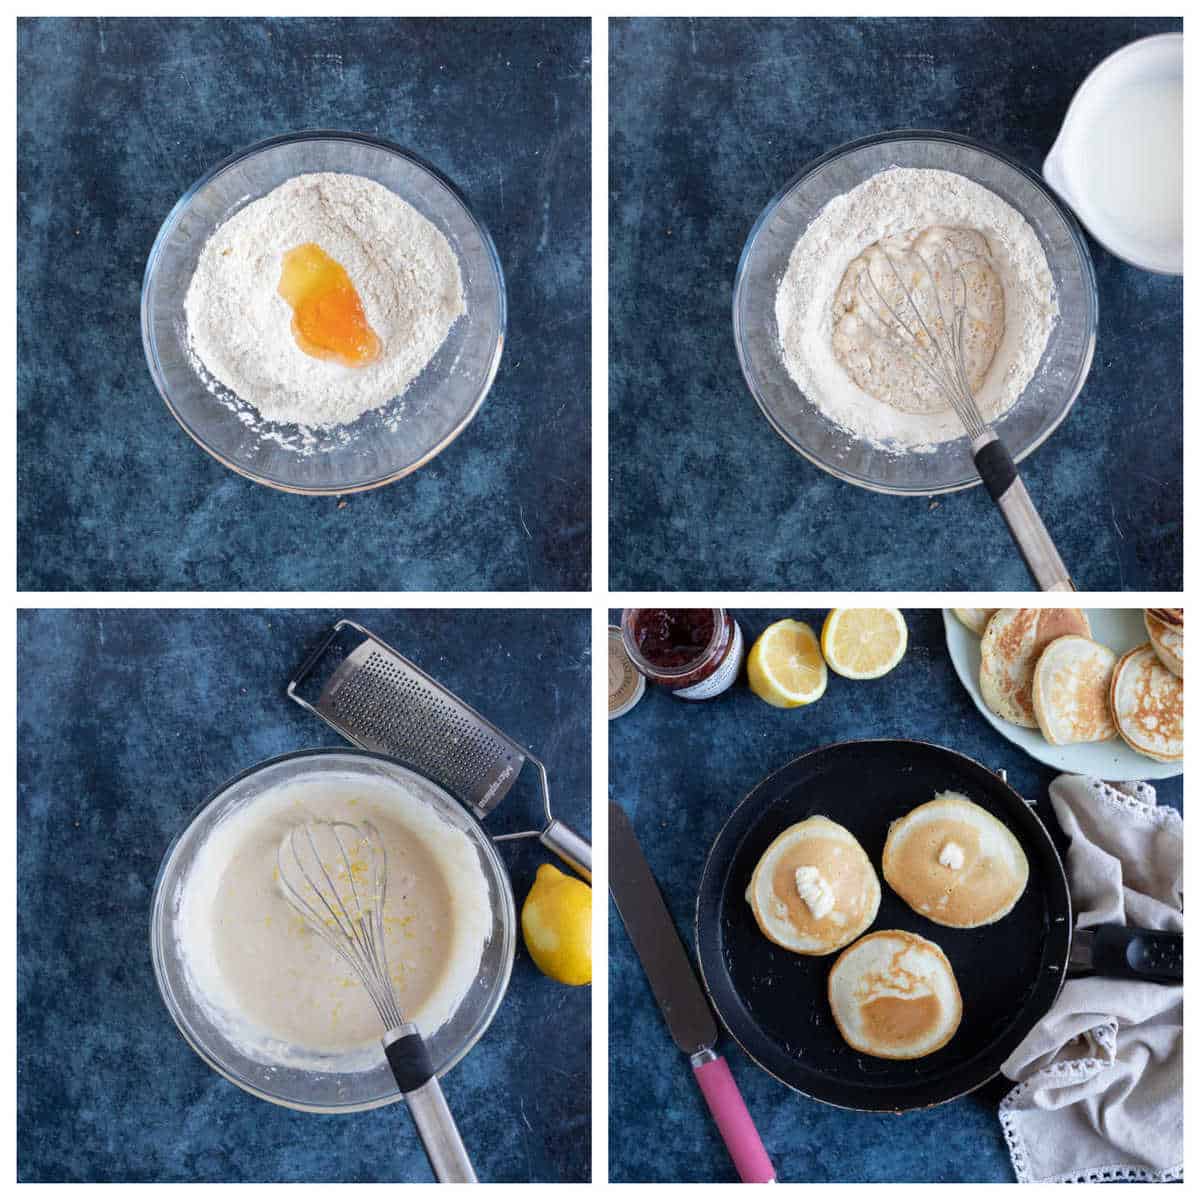 Step by step photo instructions for making scotch pancakes (drop scones).